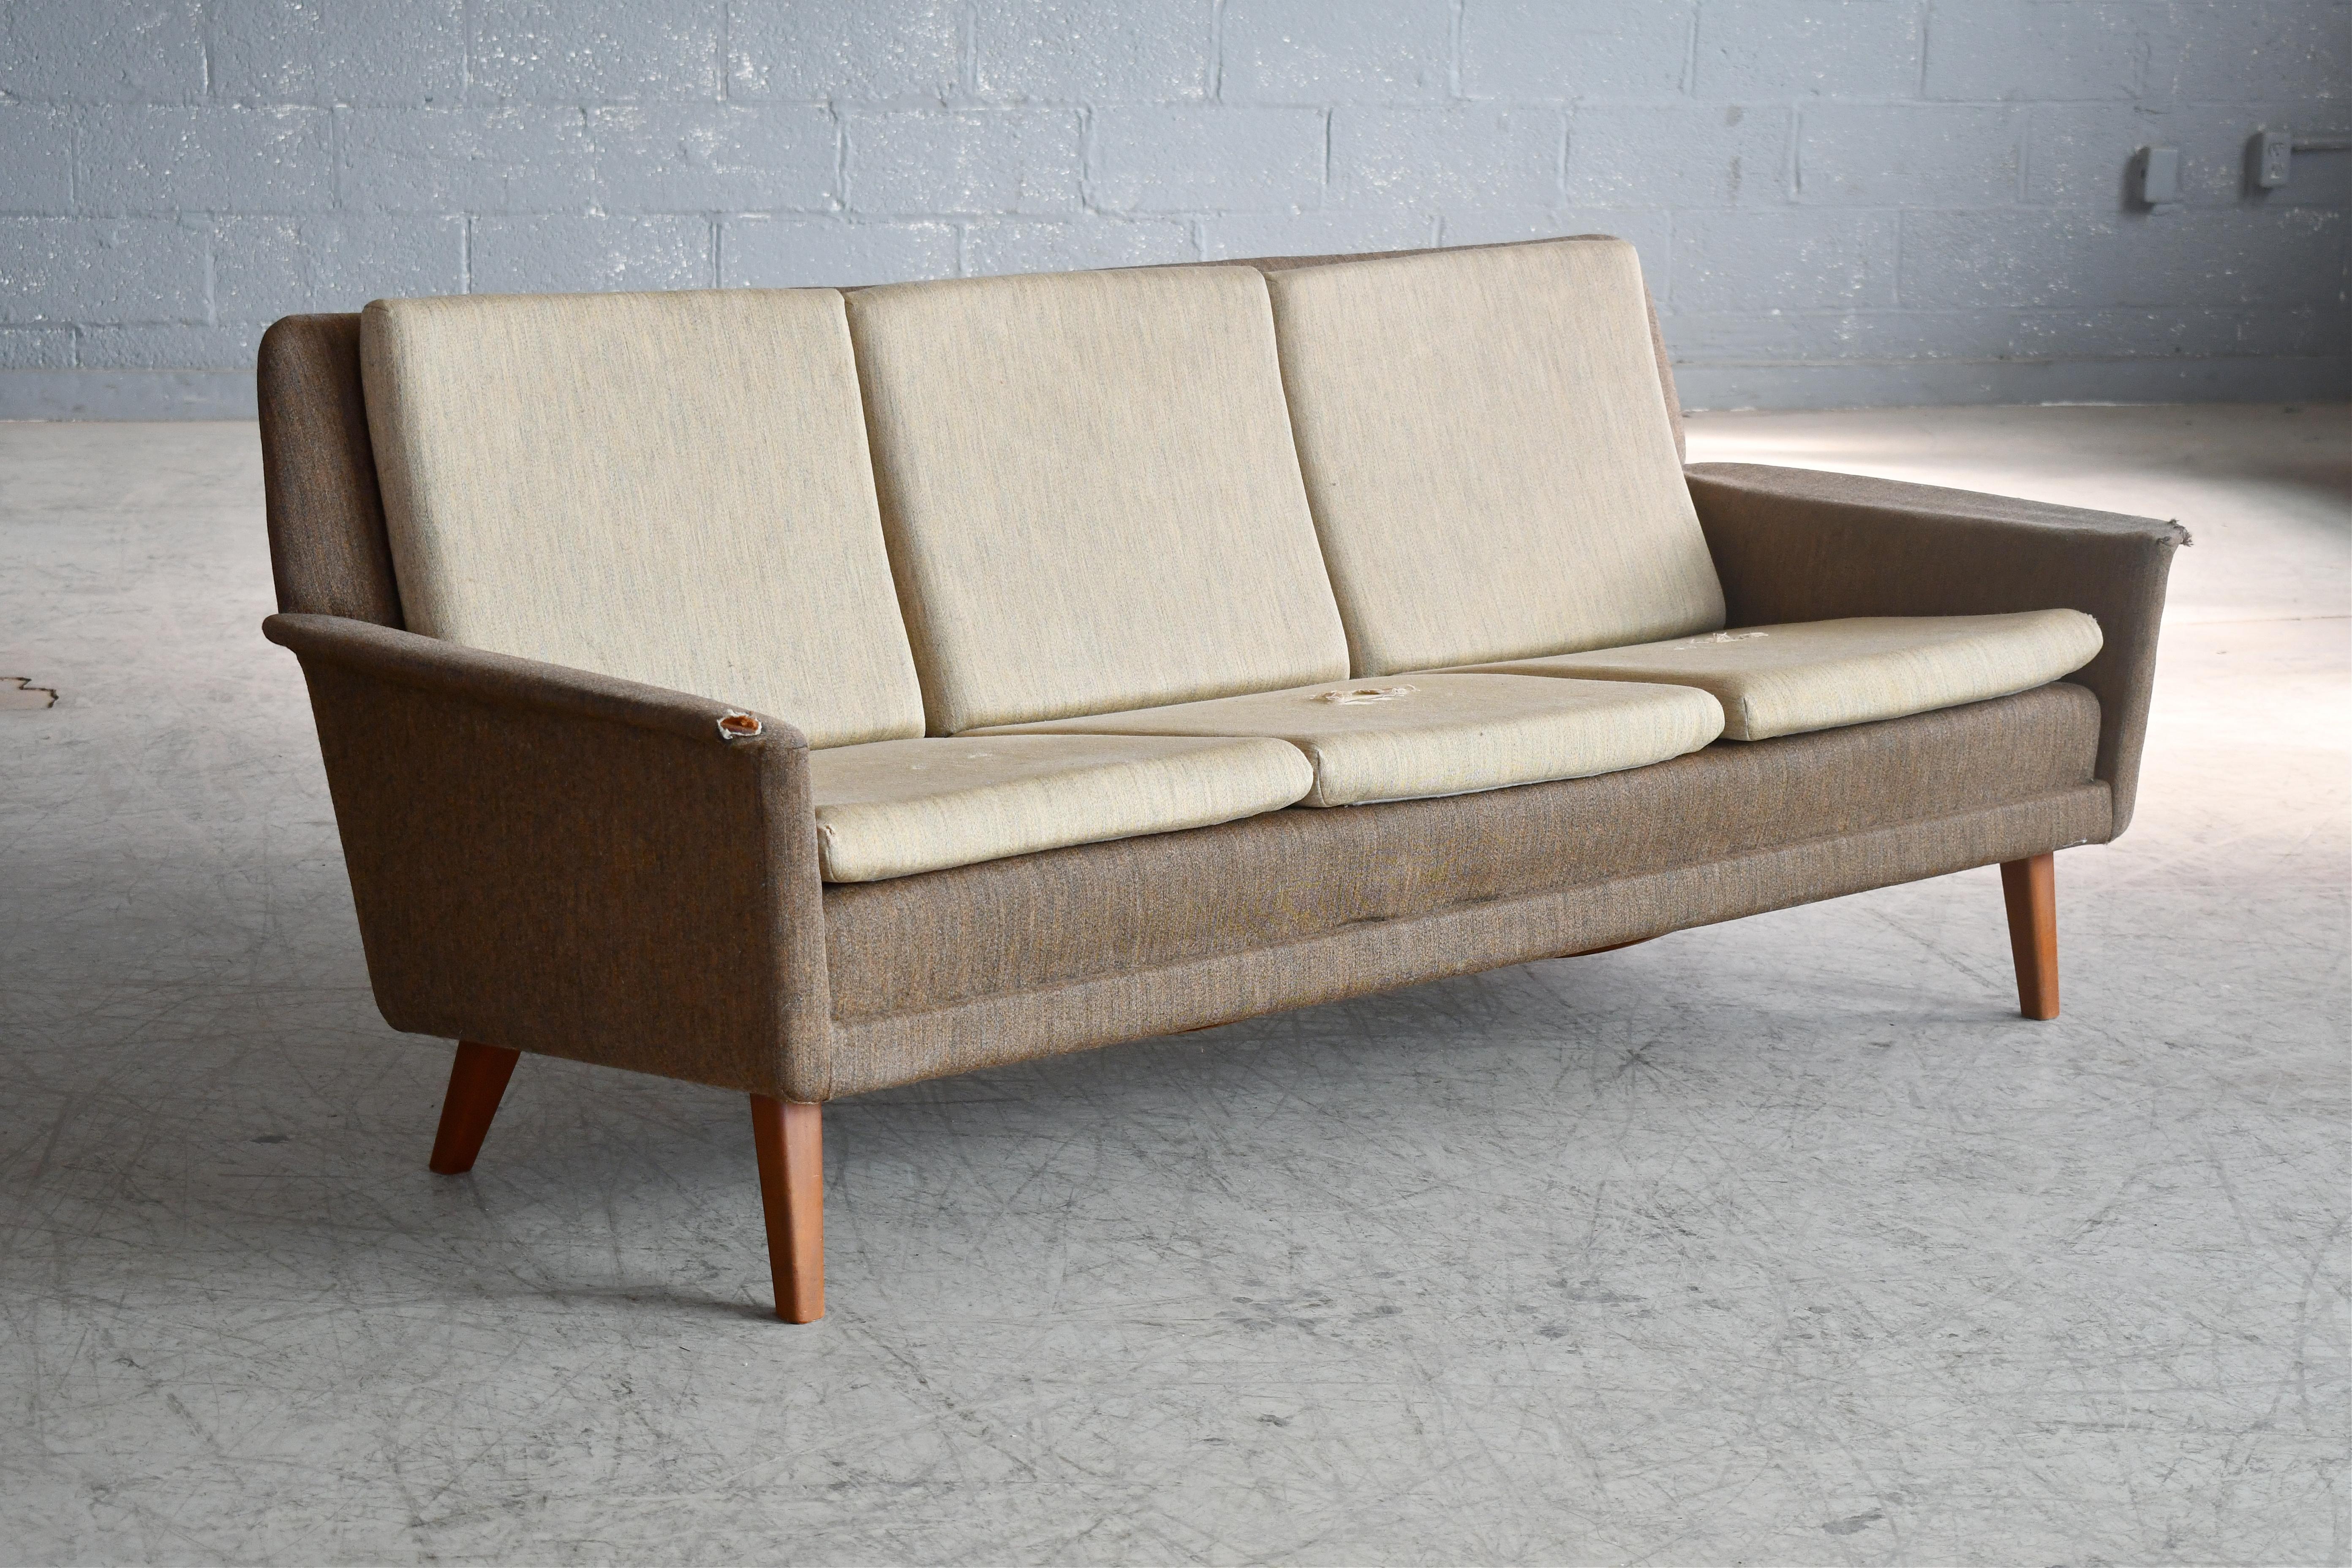 Classic and very elegant three-seat sofa designed by Folke Ohlsson in 1955 as Model 5464 for Fritz Hansen. We love the elegant angles of the sofa and the legs combined the slim cushions raised on teak legs. Very cutting edge in its day and just a